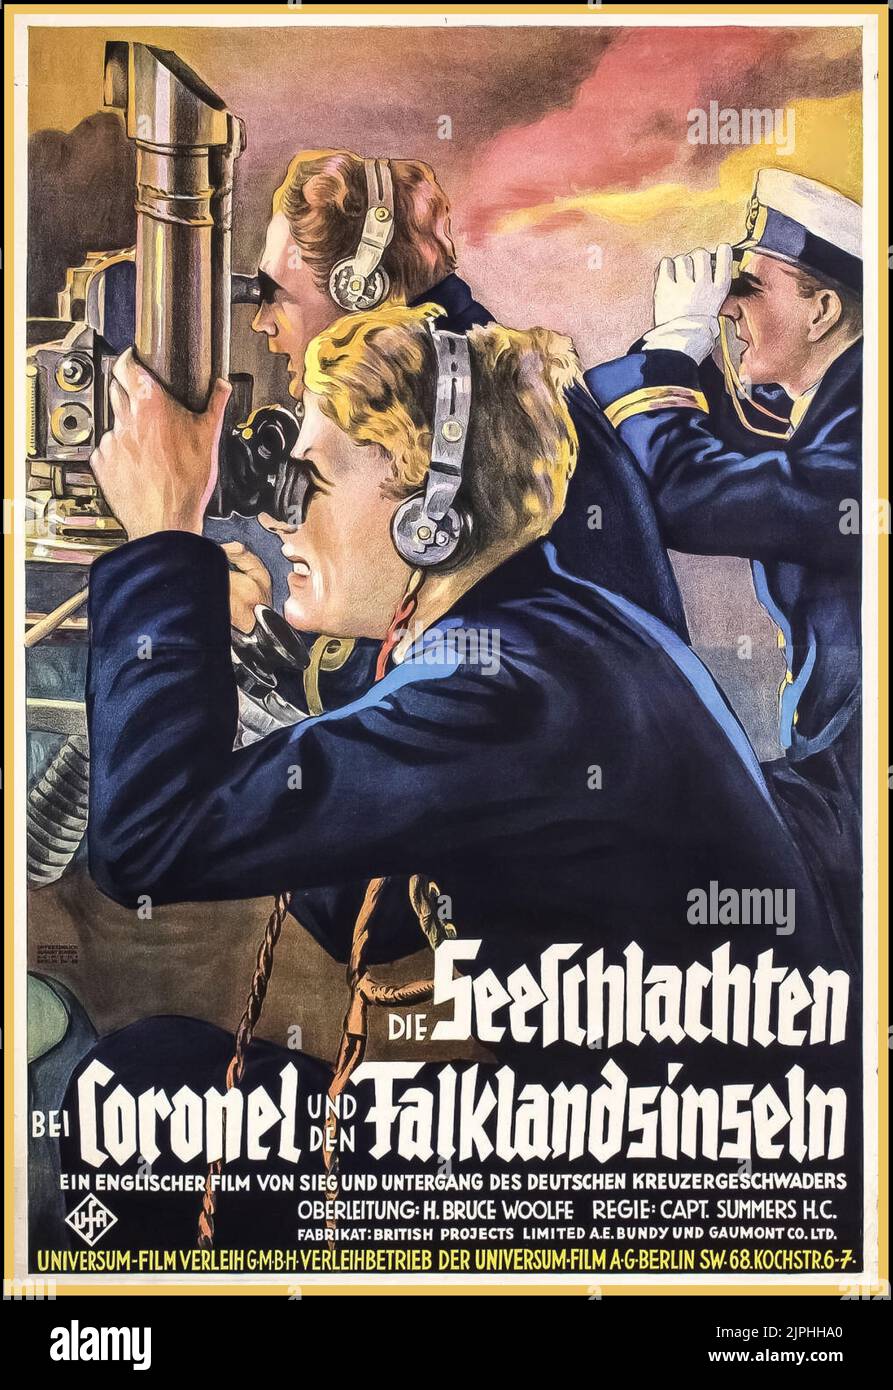 Vintage 1927 film poster for The Naval Battles Of Coronel And Falkland Islands, a British documentary. Die Seeschlachten Bei Coronel Und Den Falklandinsein Film Poster (German version poster for the film). Walter Summers and H. Bruce Woolfe in The Battles of Coronel and Falkland Islands (1927) Stock Photo